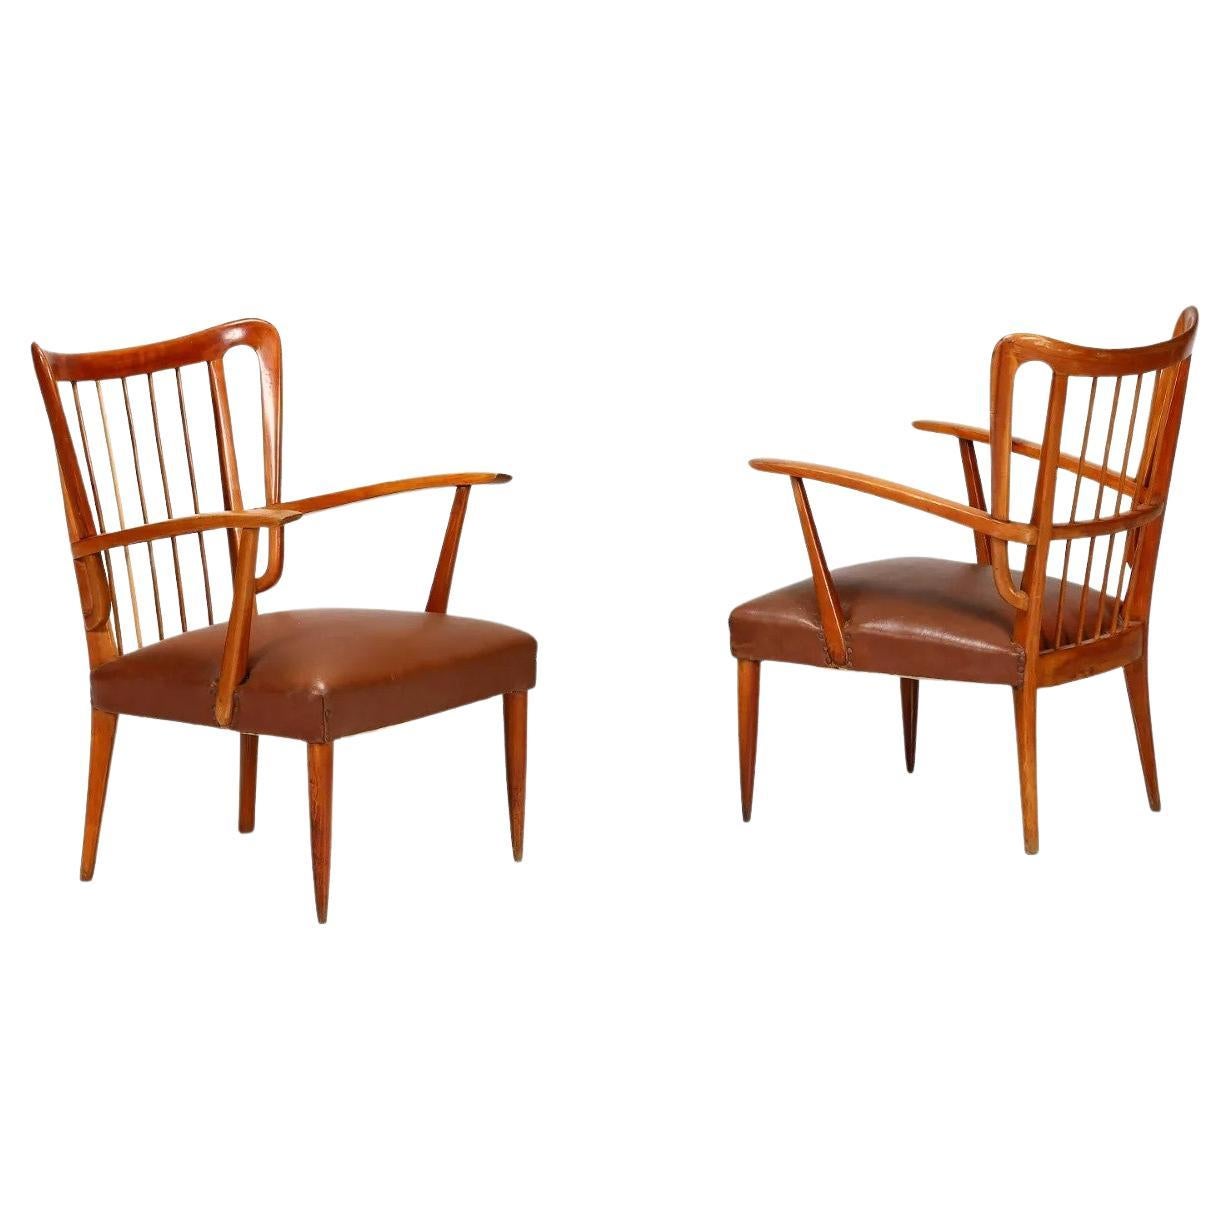 Pair of Paolo Buffa Armchairs in Rosewood, Italy 1950s, Mid-Century Modern